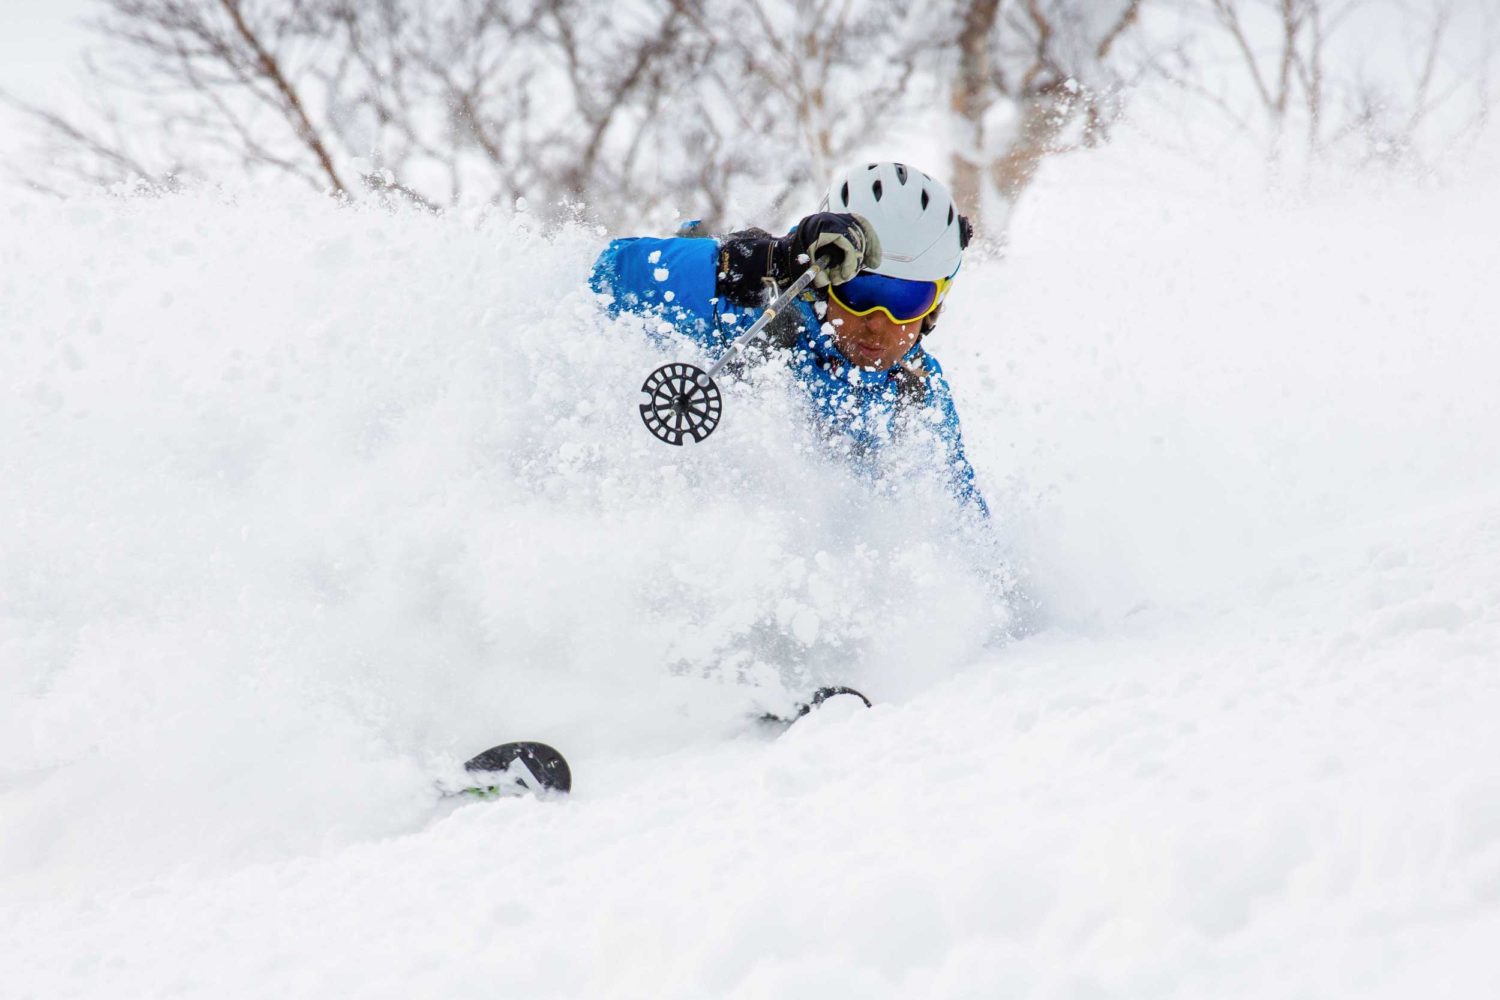 A skier in blue and a white helmet throwing up a spray of snow on a turn in Niseko, Japan